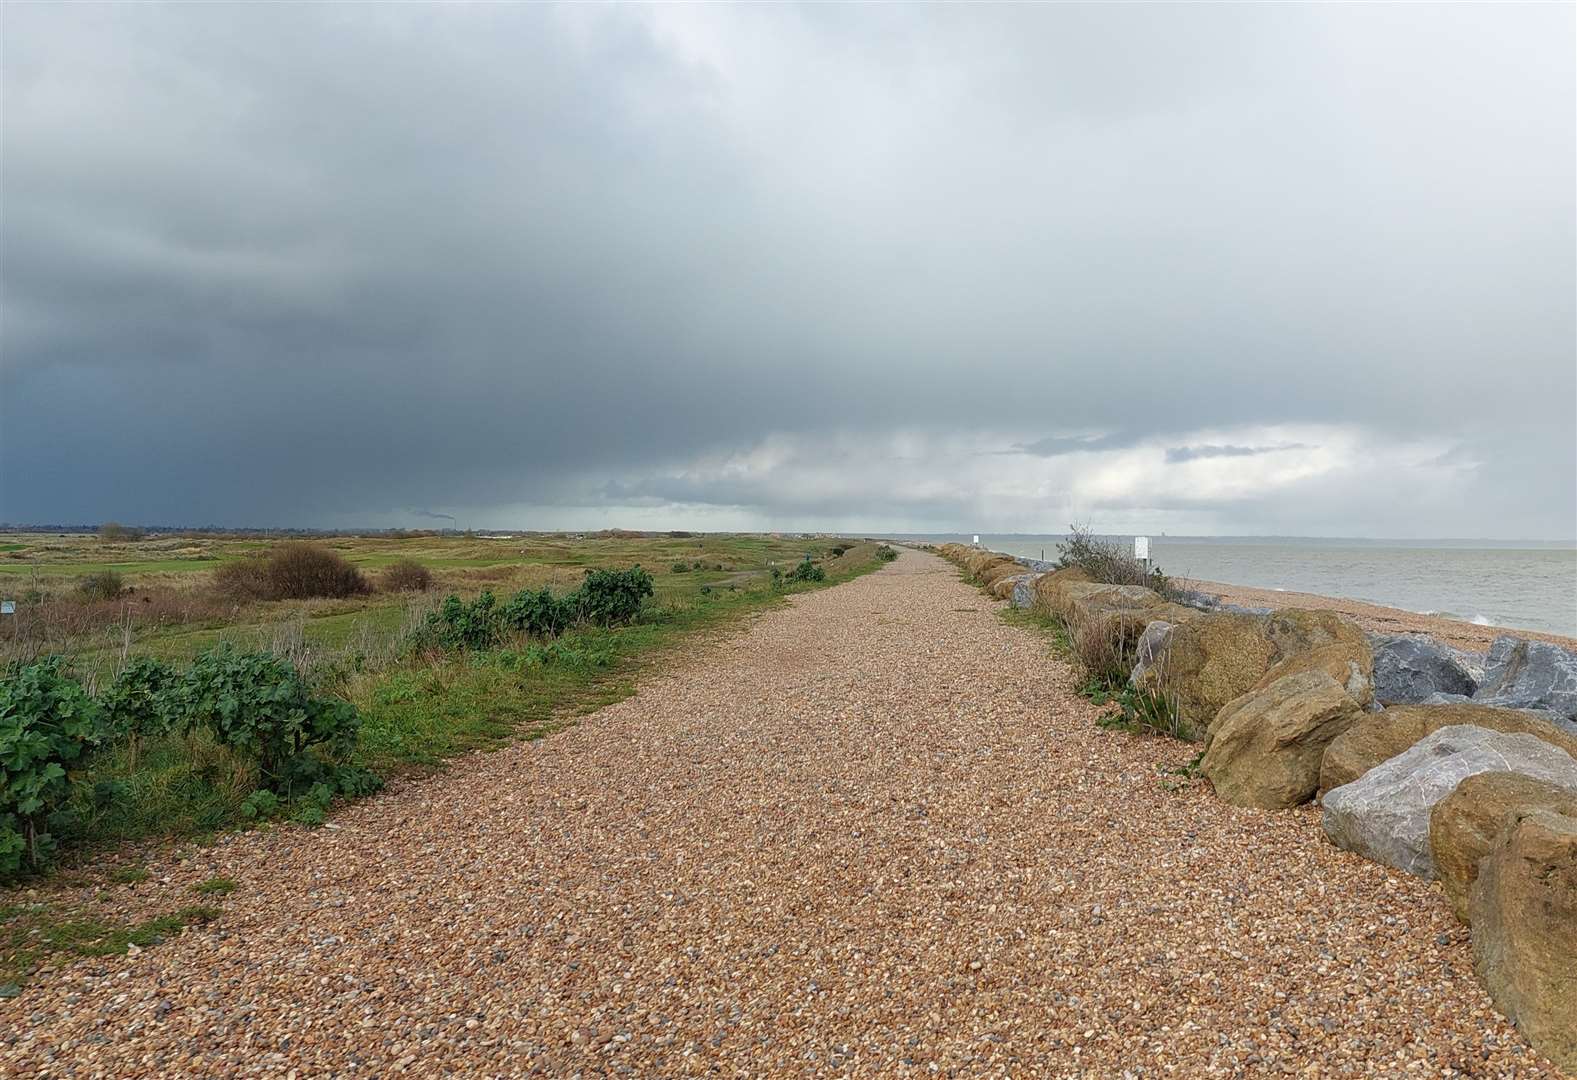 The 3km shingle path stretches between Sandown Castle and Sandwich Bay